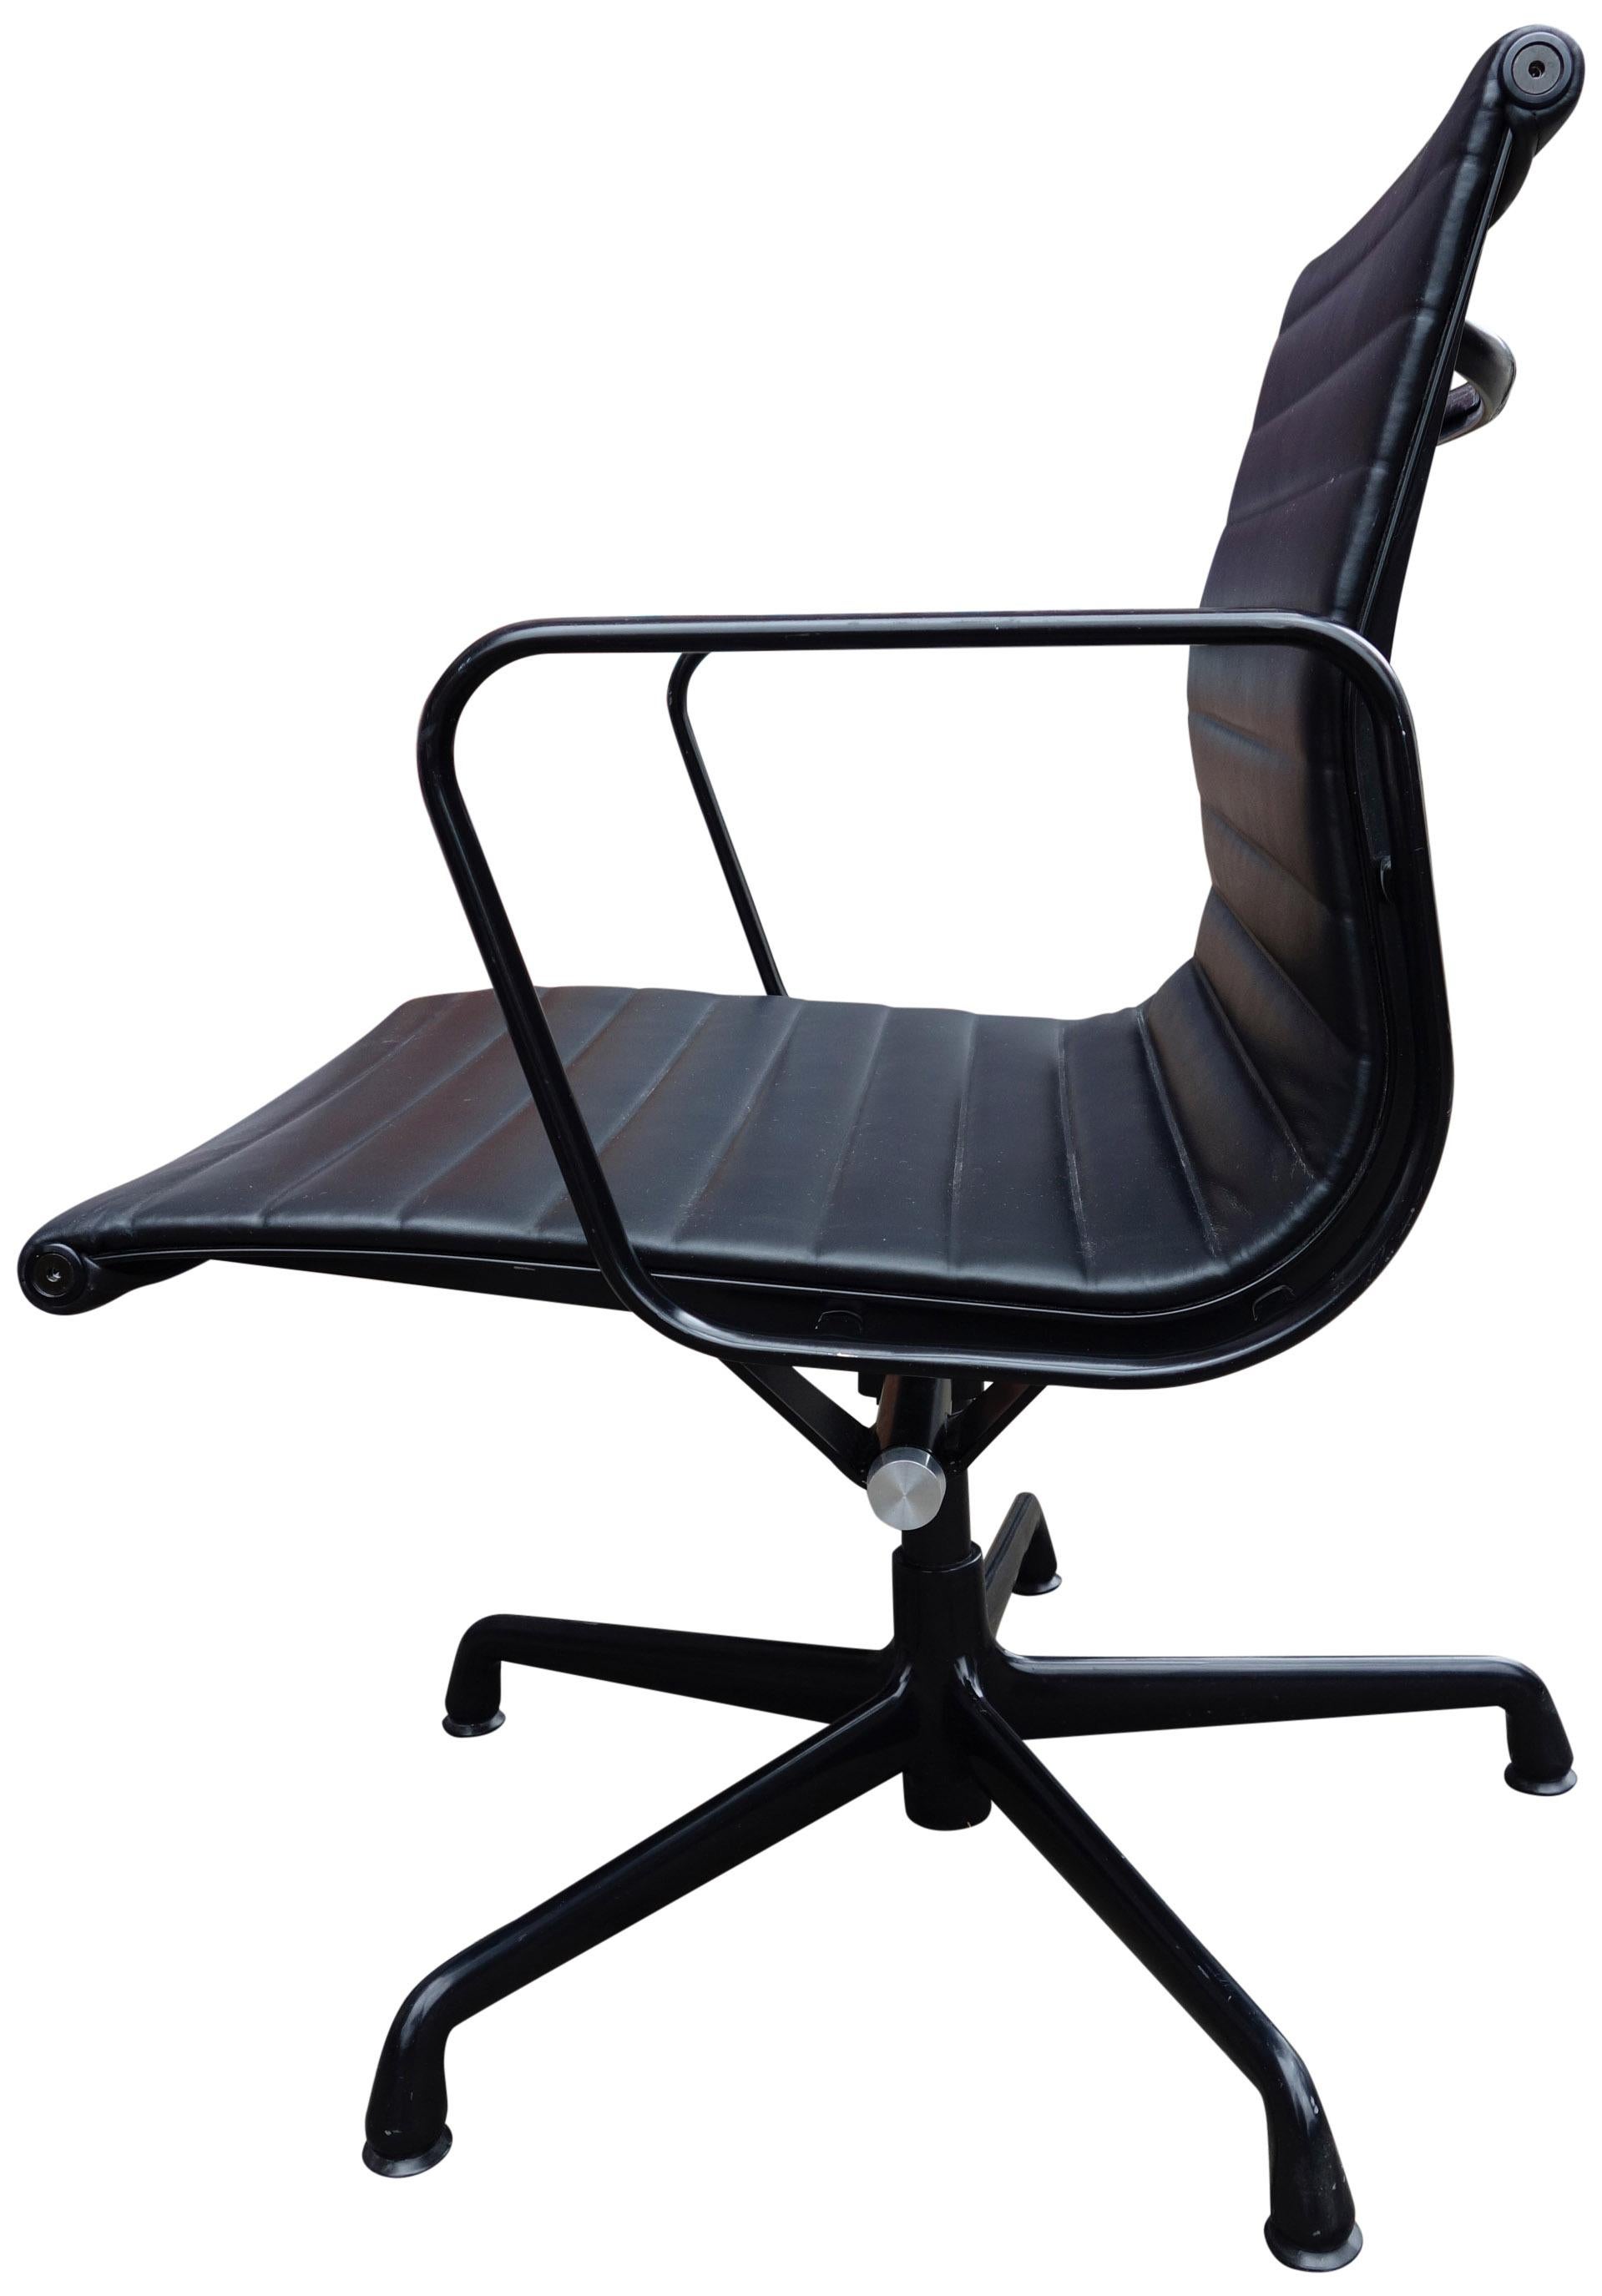 For your consideration are up to 4 midcentury Eames chairs upholstered in black leather. Featuring a wonderful black on black combination. Swivel and tilt with adjustable height. Elegance and comfort separates this iconic chair from the rest. First